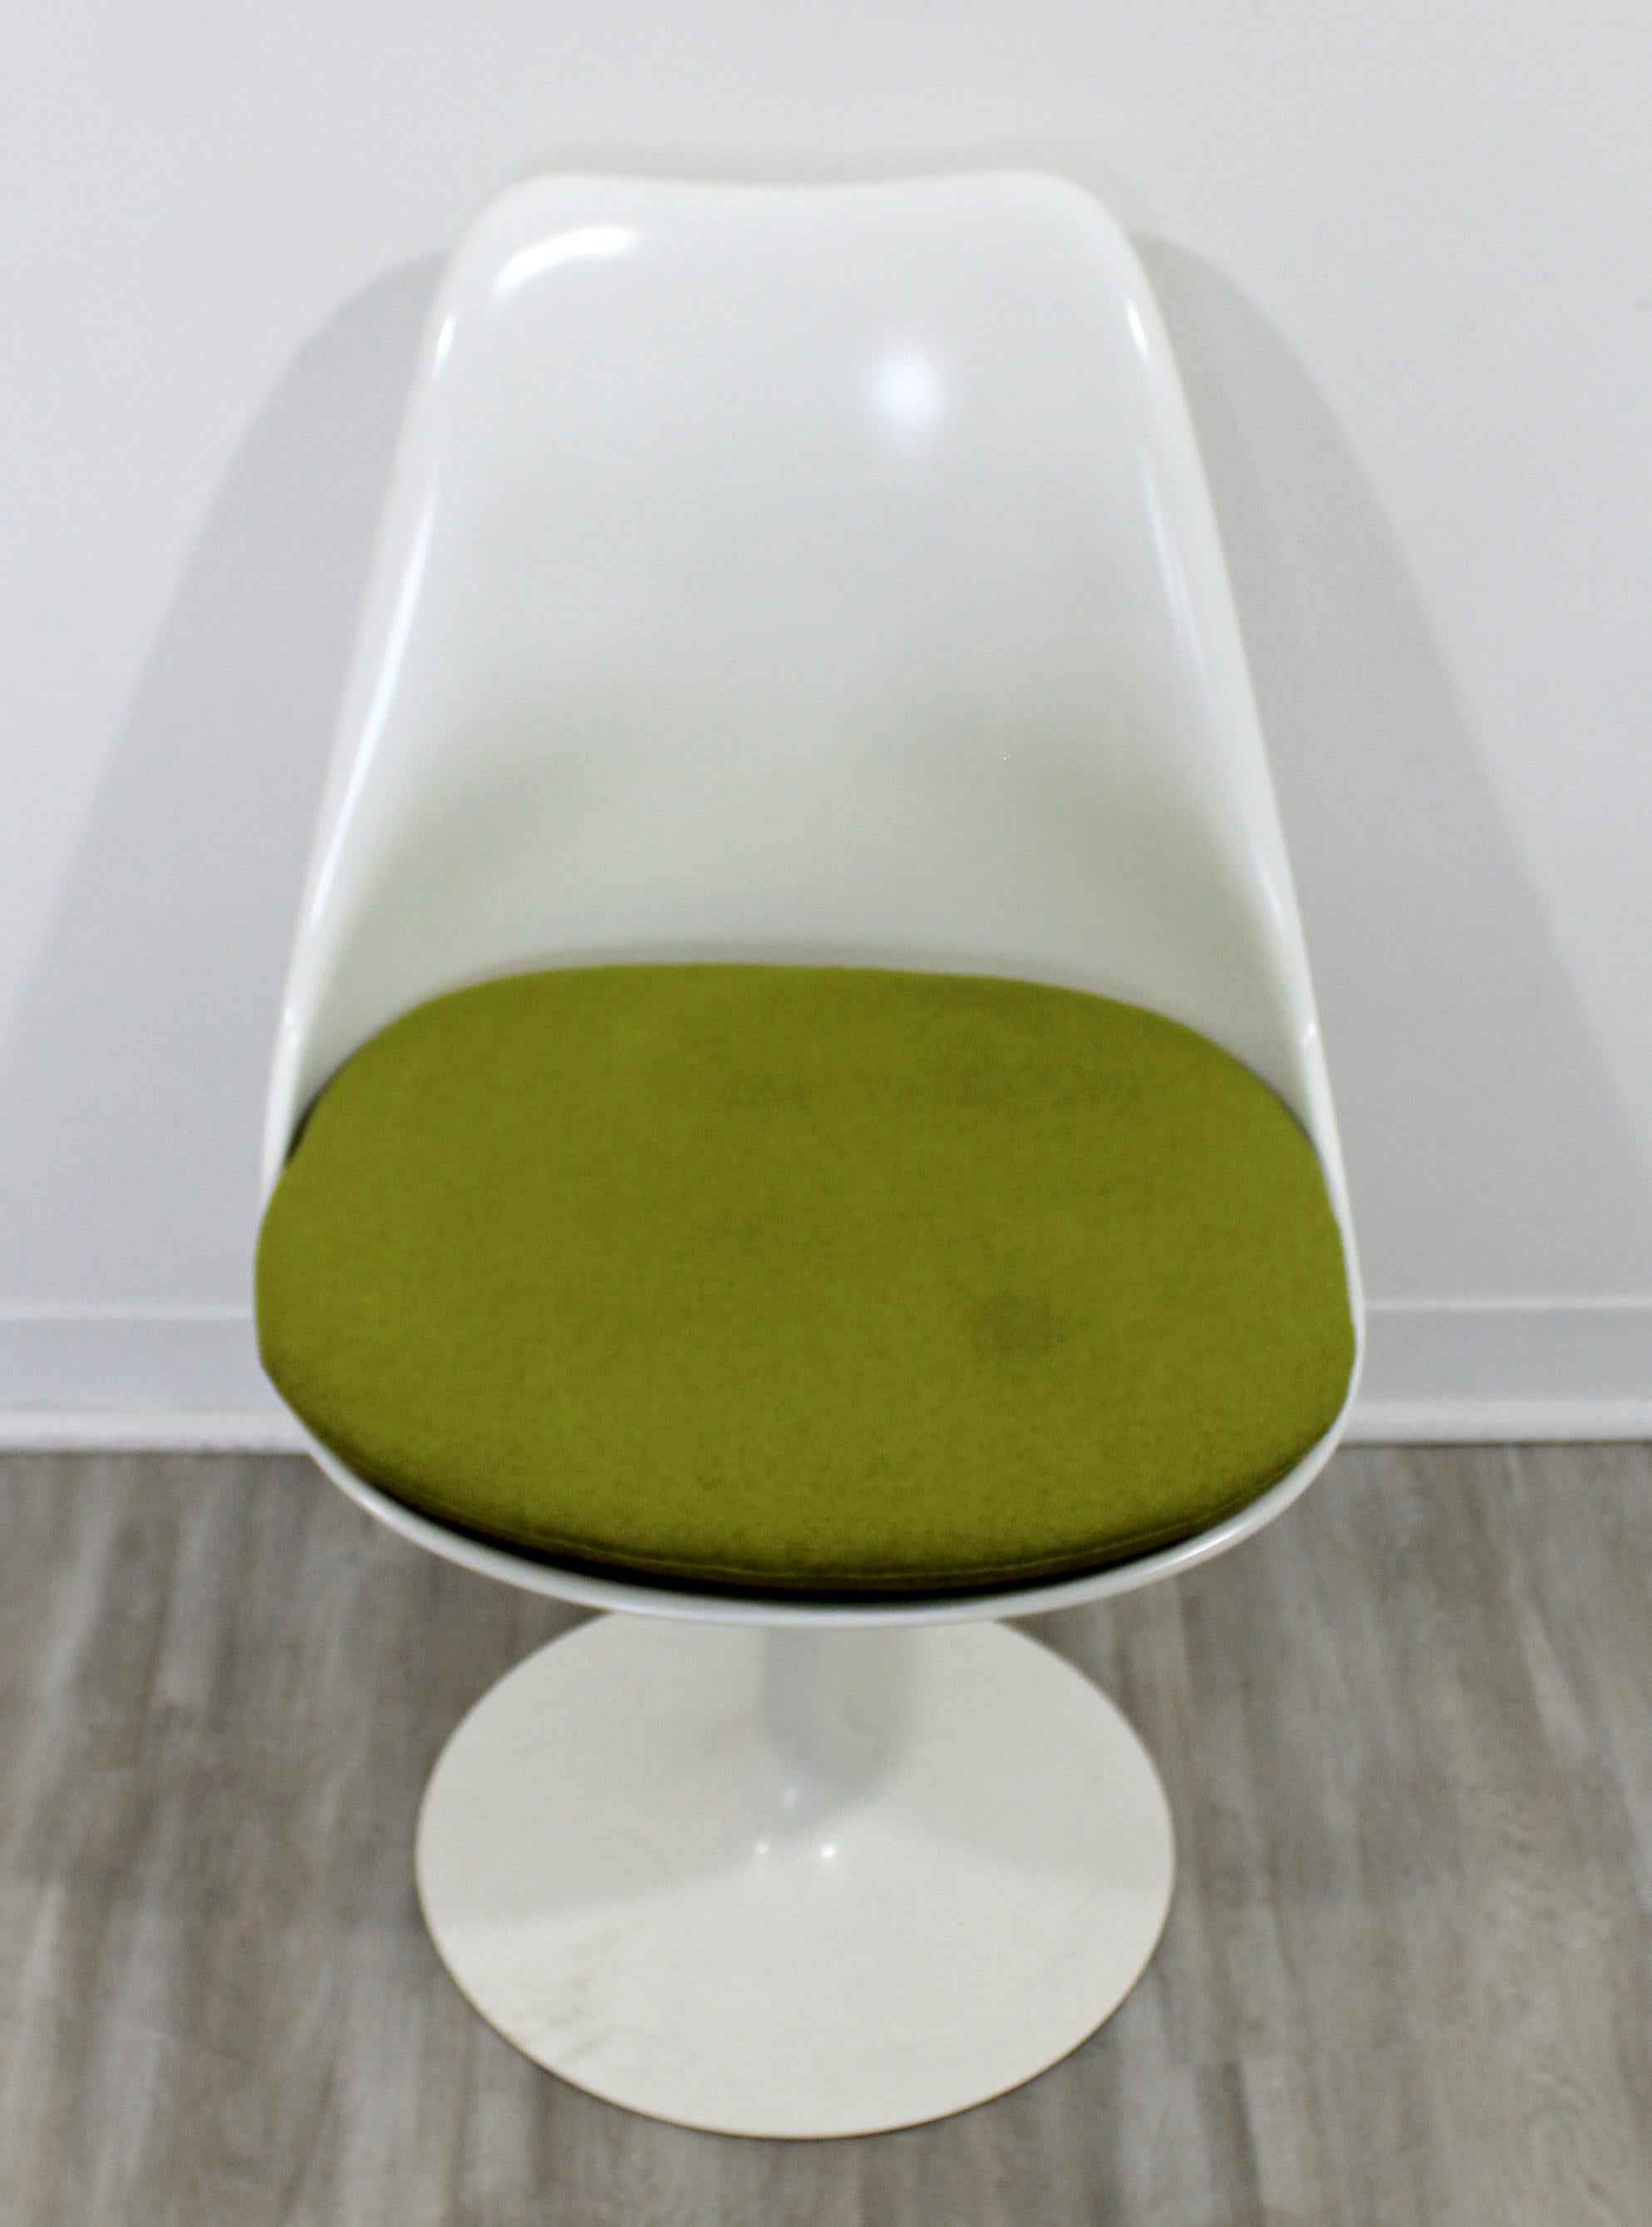 For your consideration is a stunning, Eero Saarinen for Knoll side chair, with a 